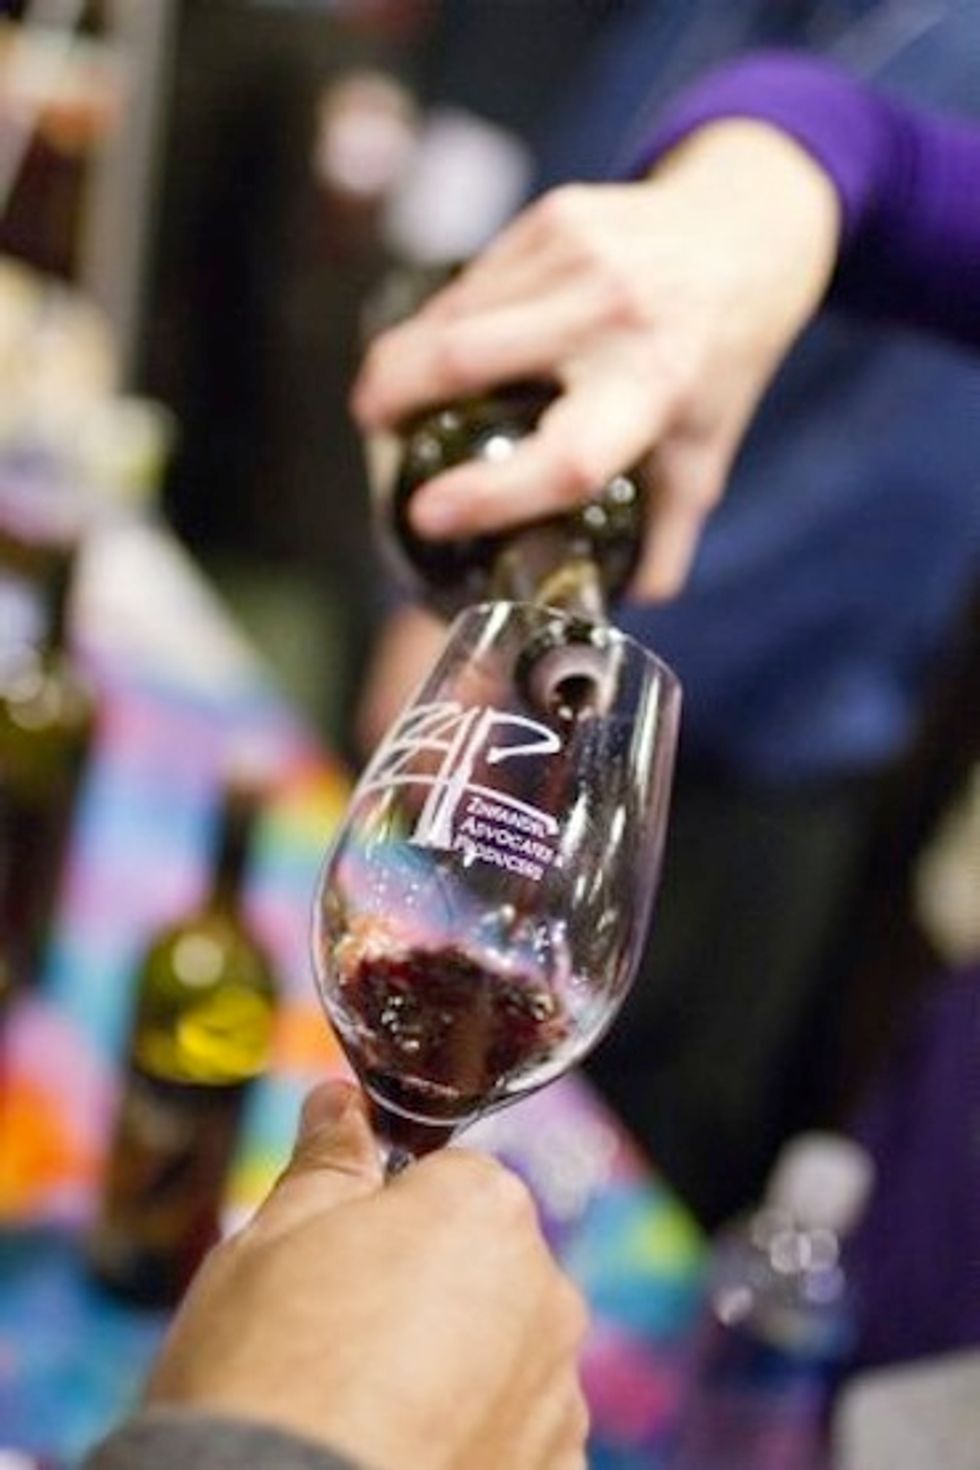 Quench Your Thirst at the 22nd Annual Zinfandel Festival